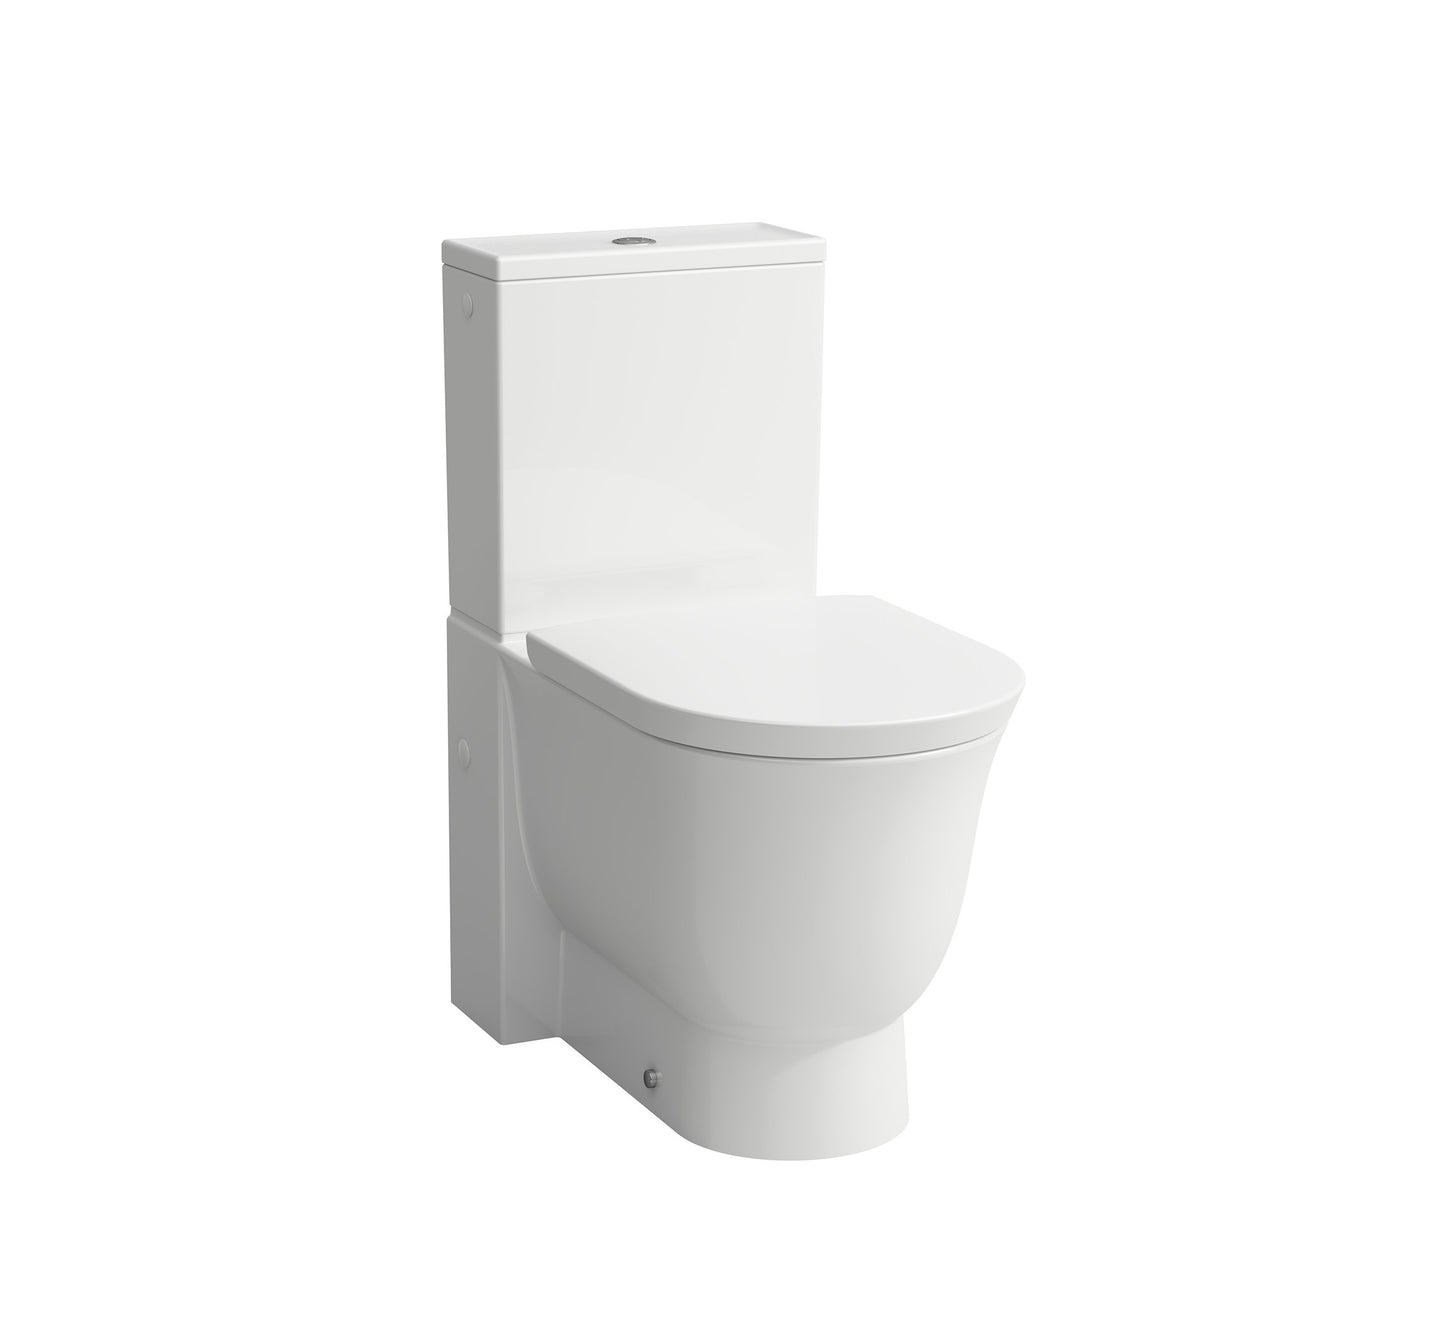 LAUFEN THE NEW CLASSIC FLOORSTANDING WC COMBINATION RIMLESS, WASHDOWN, HORIZONTAL OR VERTICAL OUTLET, BACK-TO- WALL FOR BOTTOM WATER INLET CISTERN WHITE - 8.2485.8.000.231.1 - Tadmur Trading